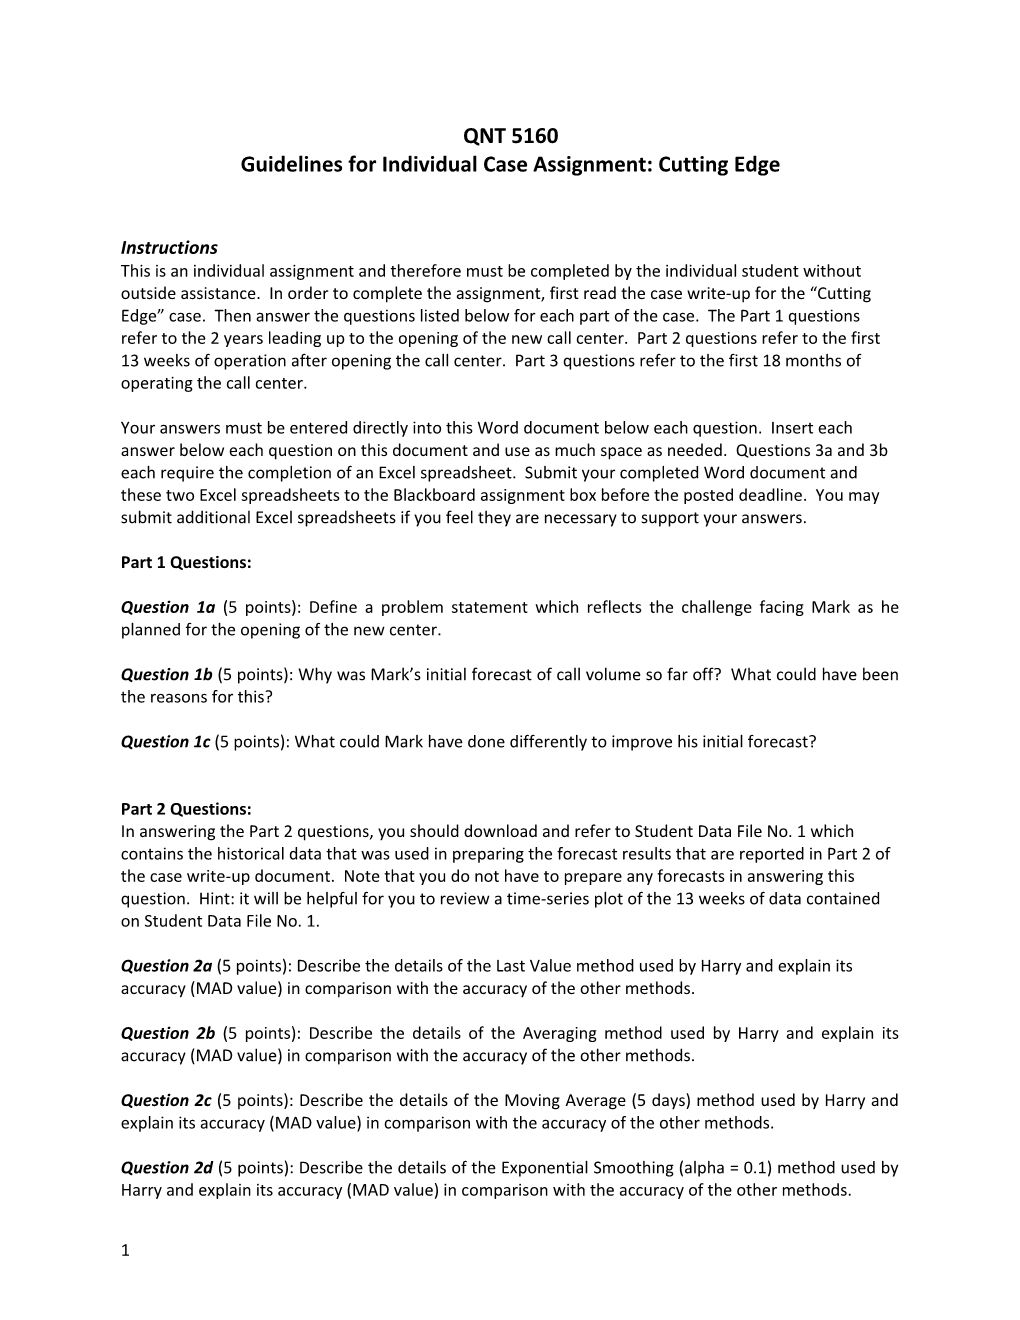 Guidelines for Individual Case Assignment: Cutting Edge